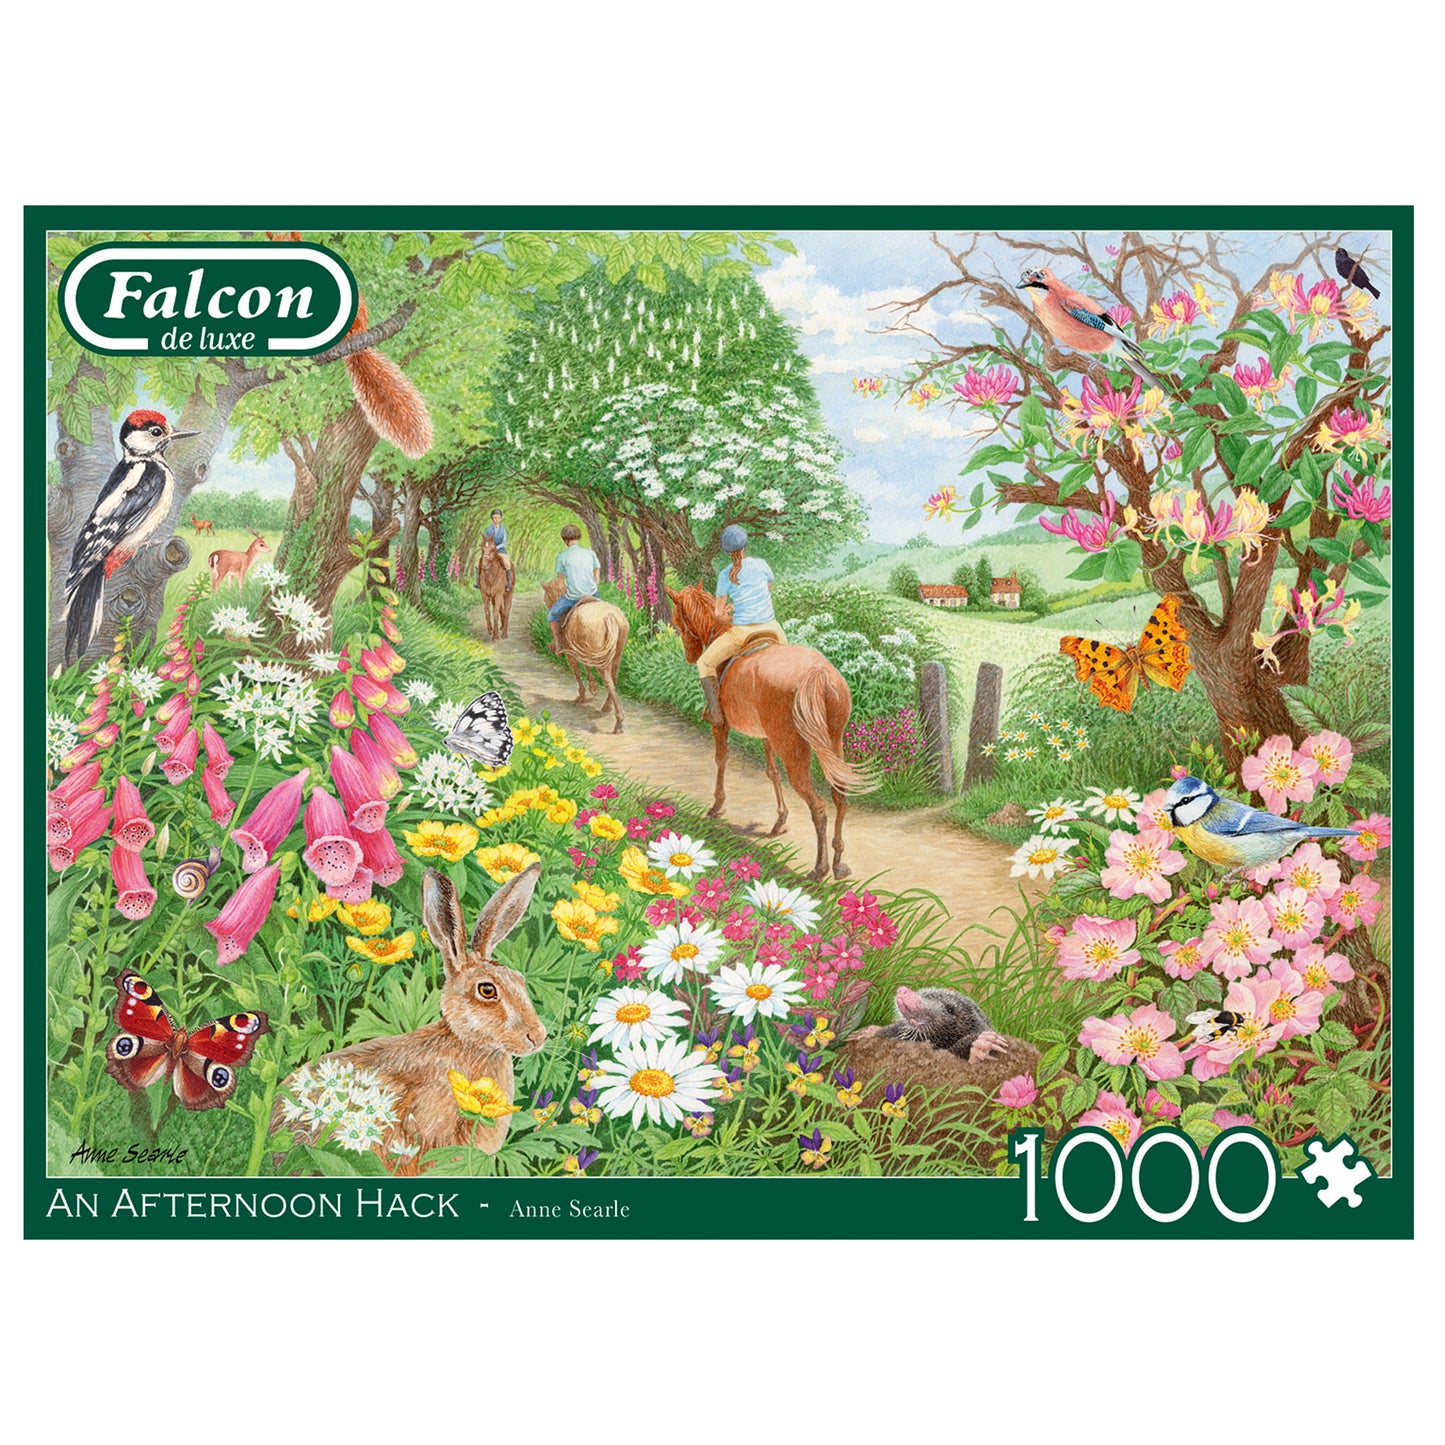 Falcon - An Afternoon Hack (1000 pieces) - product image - Jumboplay.com